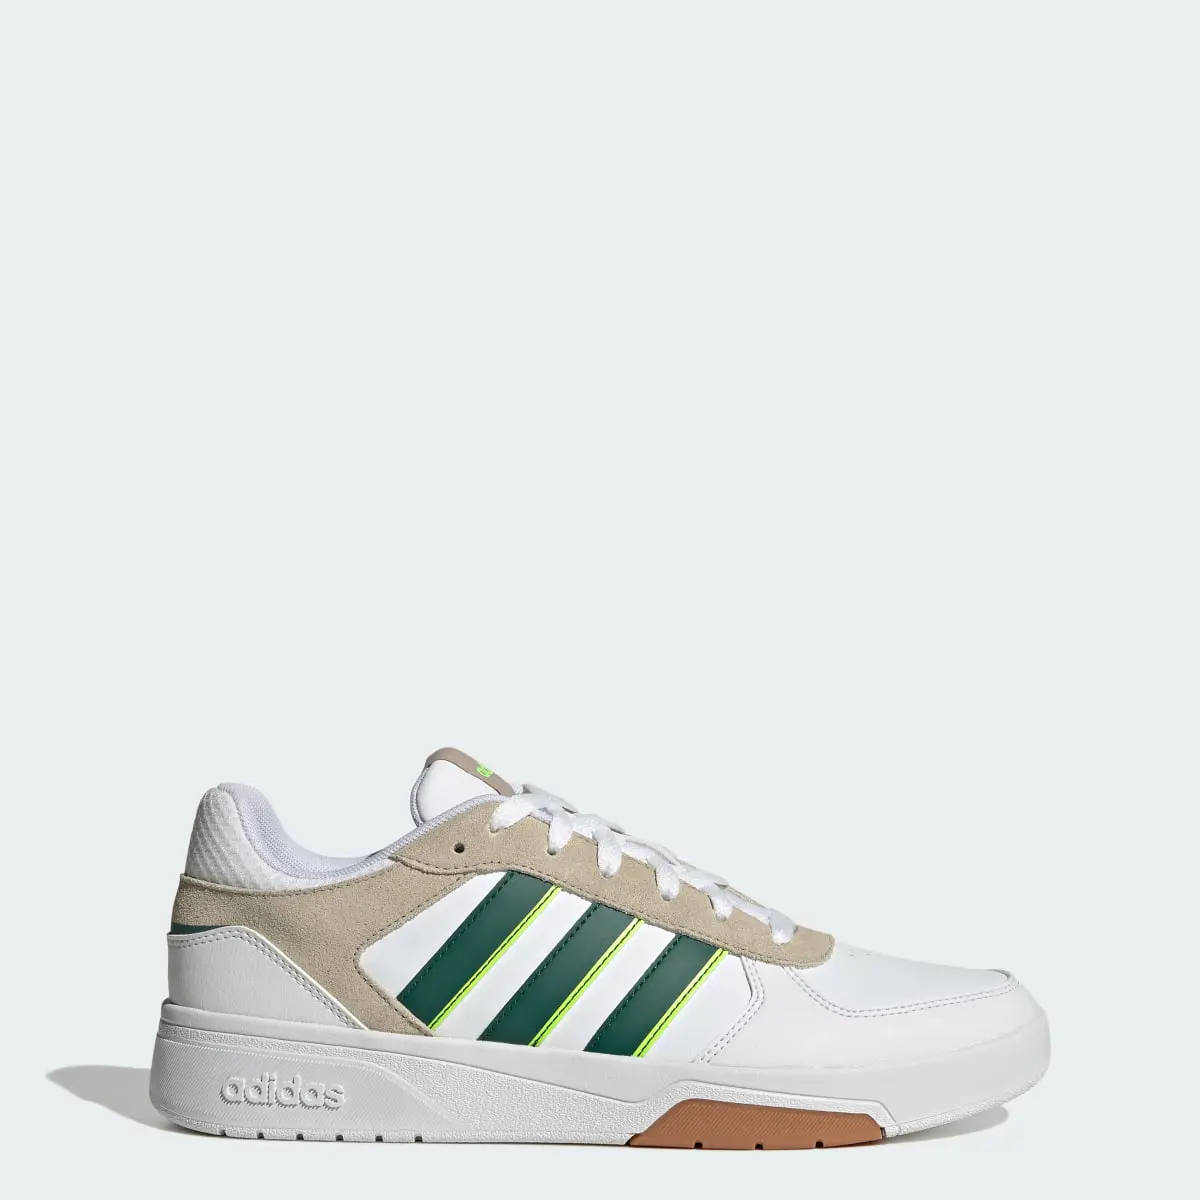 Adidas Courtbeat Shoes. 1